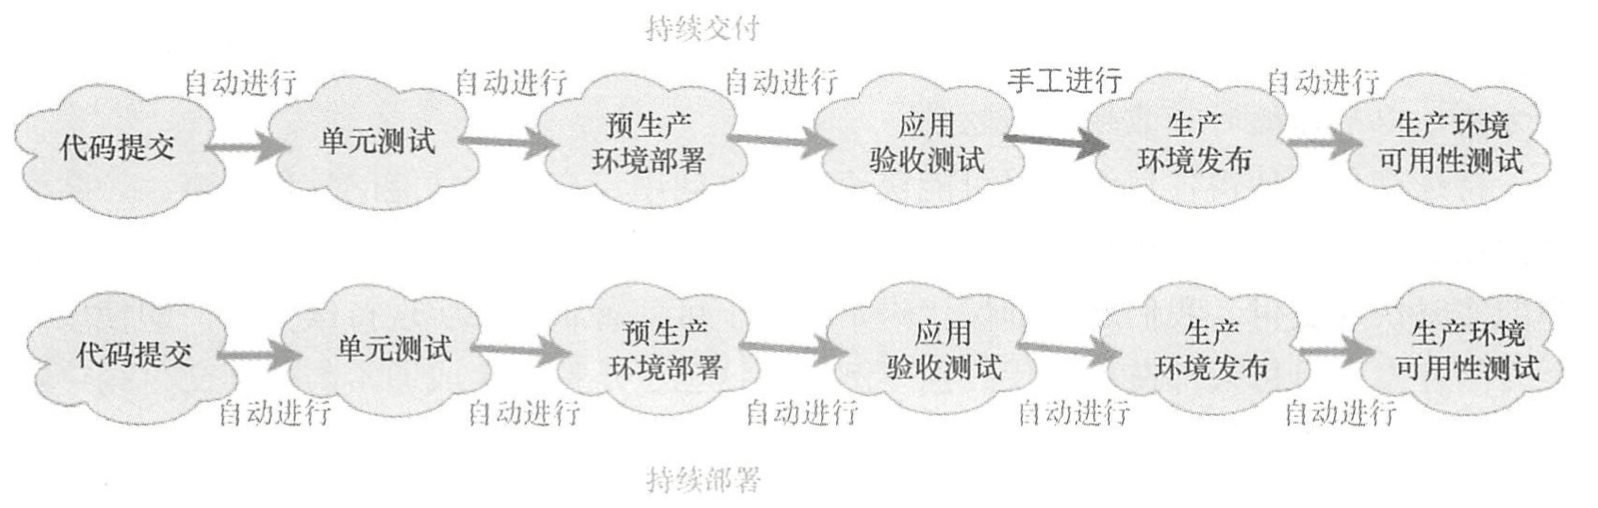 https://img.zhaoweiguo.com/knowledge/images/devops/cicds/delivery_deployment2.png